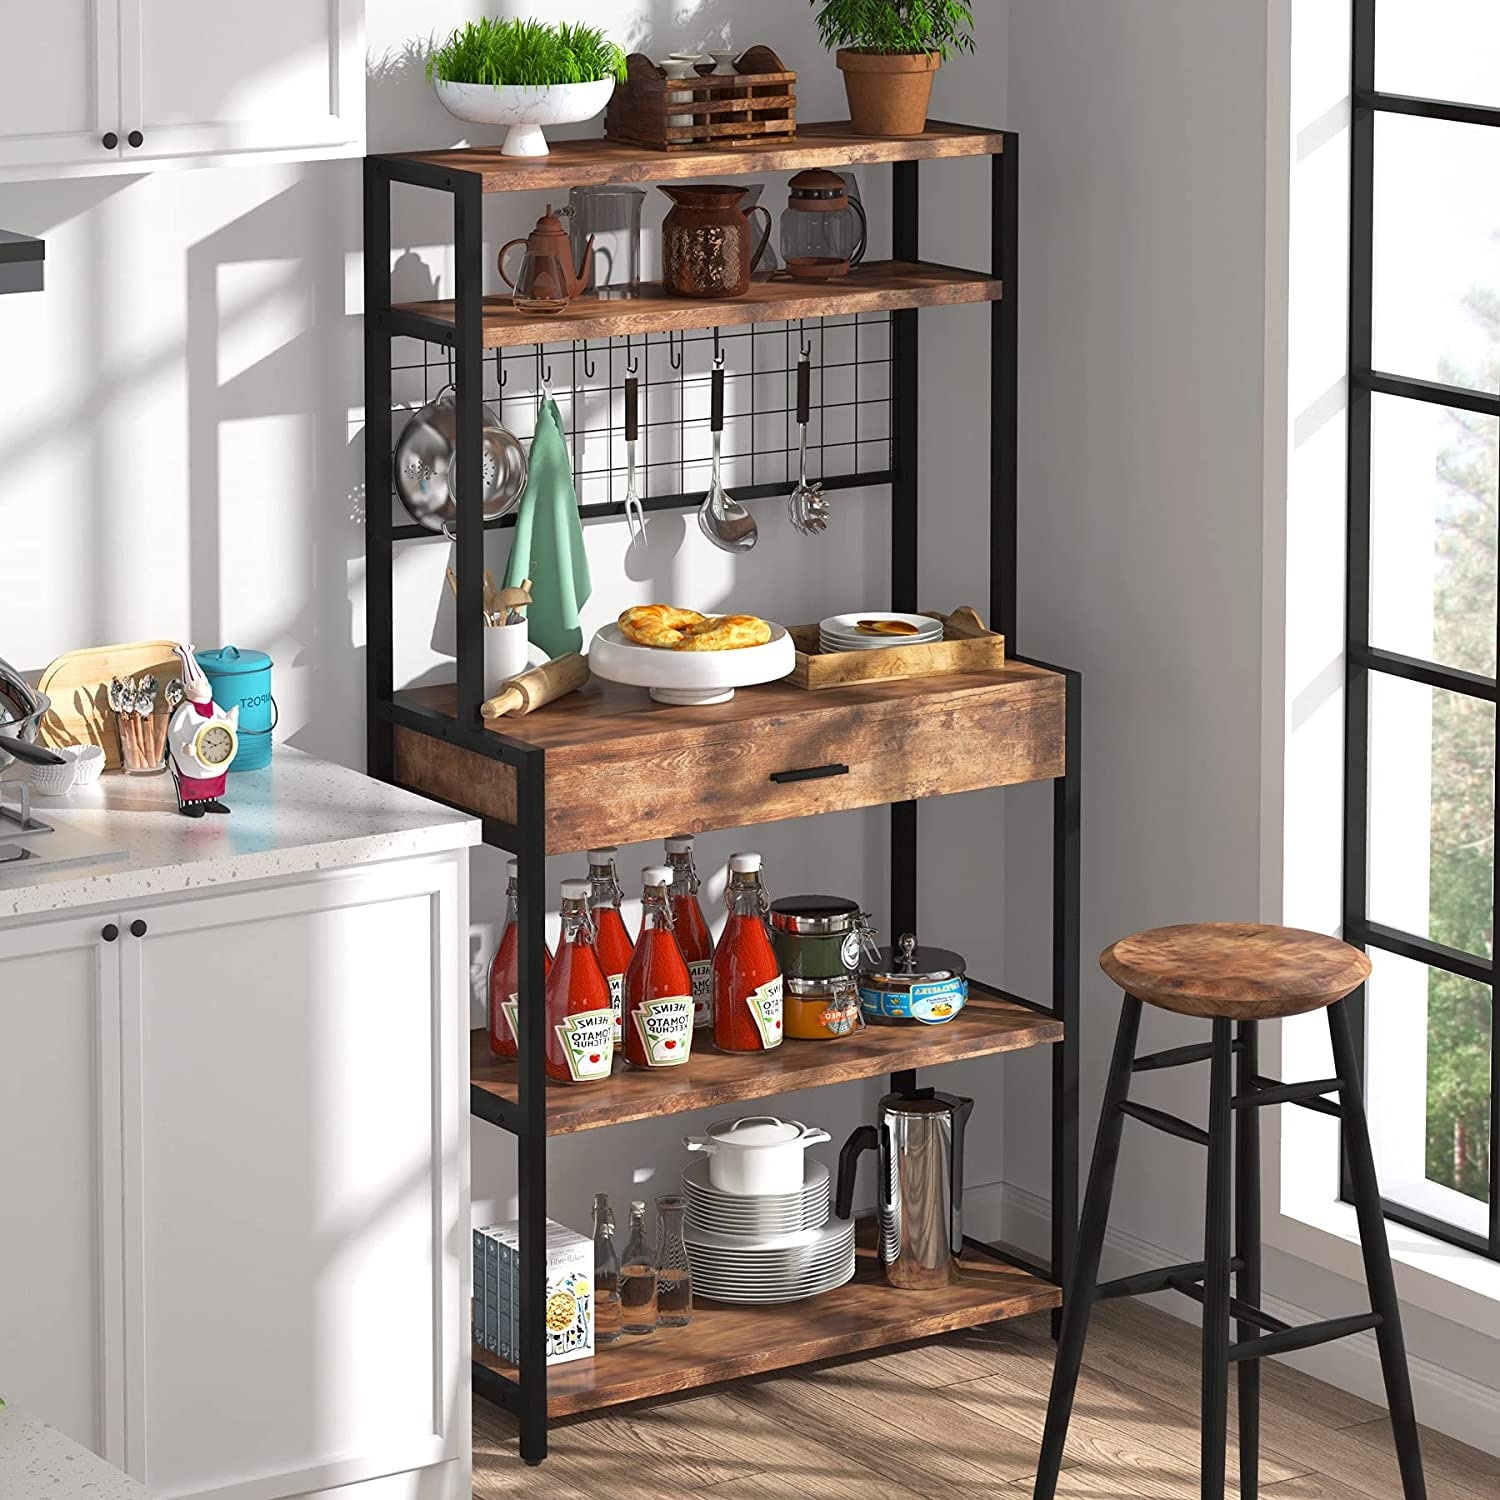 https://ak1.ostkcdn.com/images/products/is/images/direct/043a1449905fce5e16c39b813ee6d0714fc92118/Kitchen-Bakers-Rack-with-Hutch%2C-5-Tier-Kitchen-Utility-Storage-Shelf.jpg